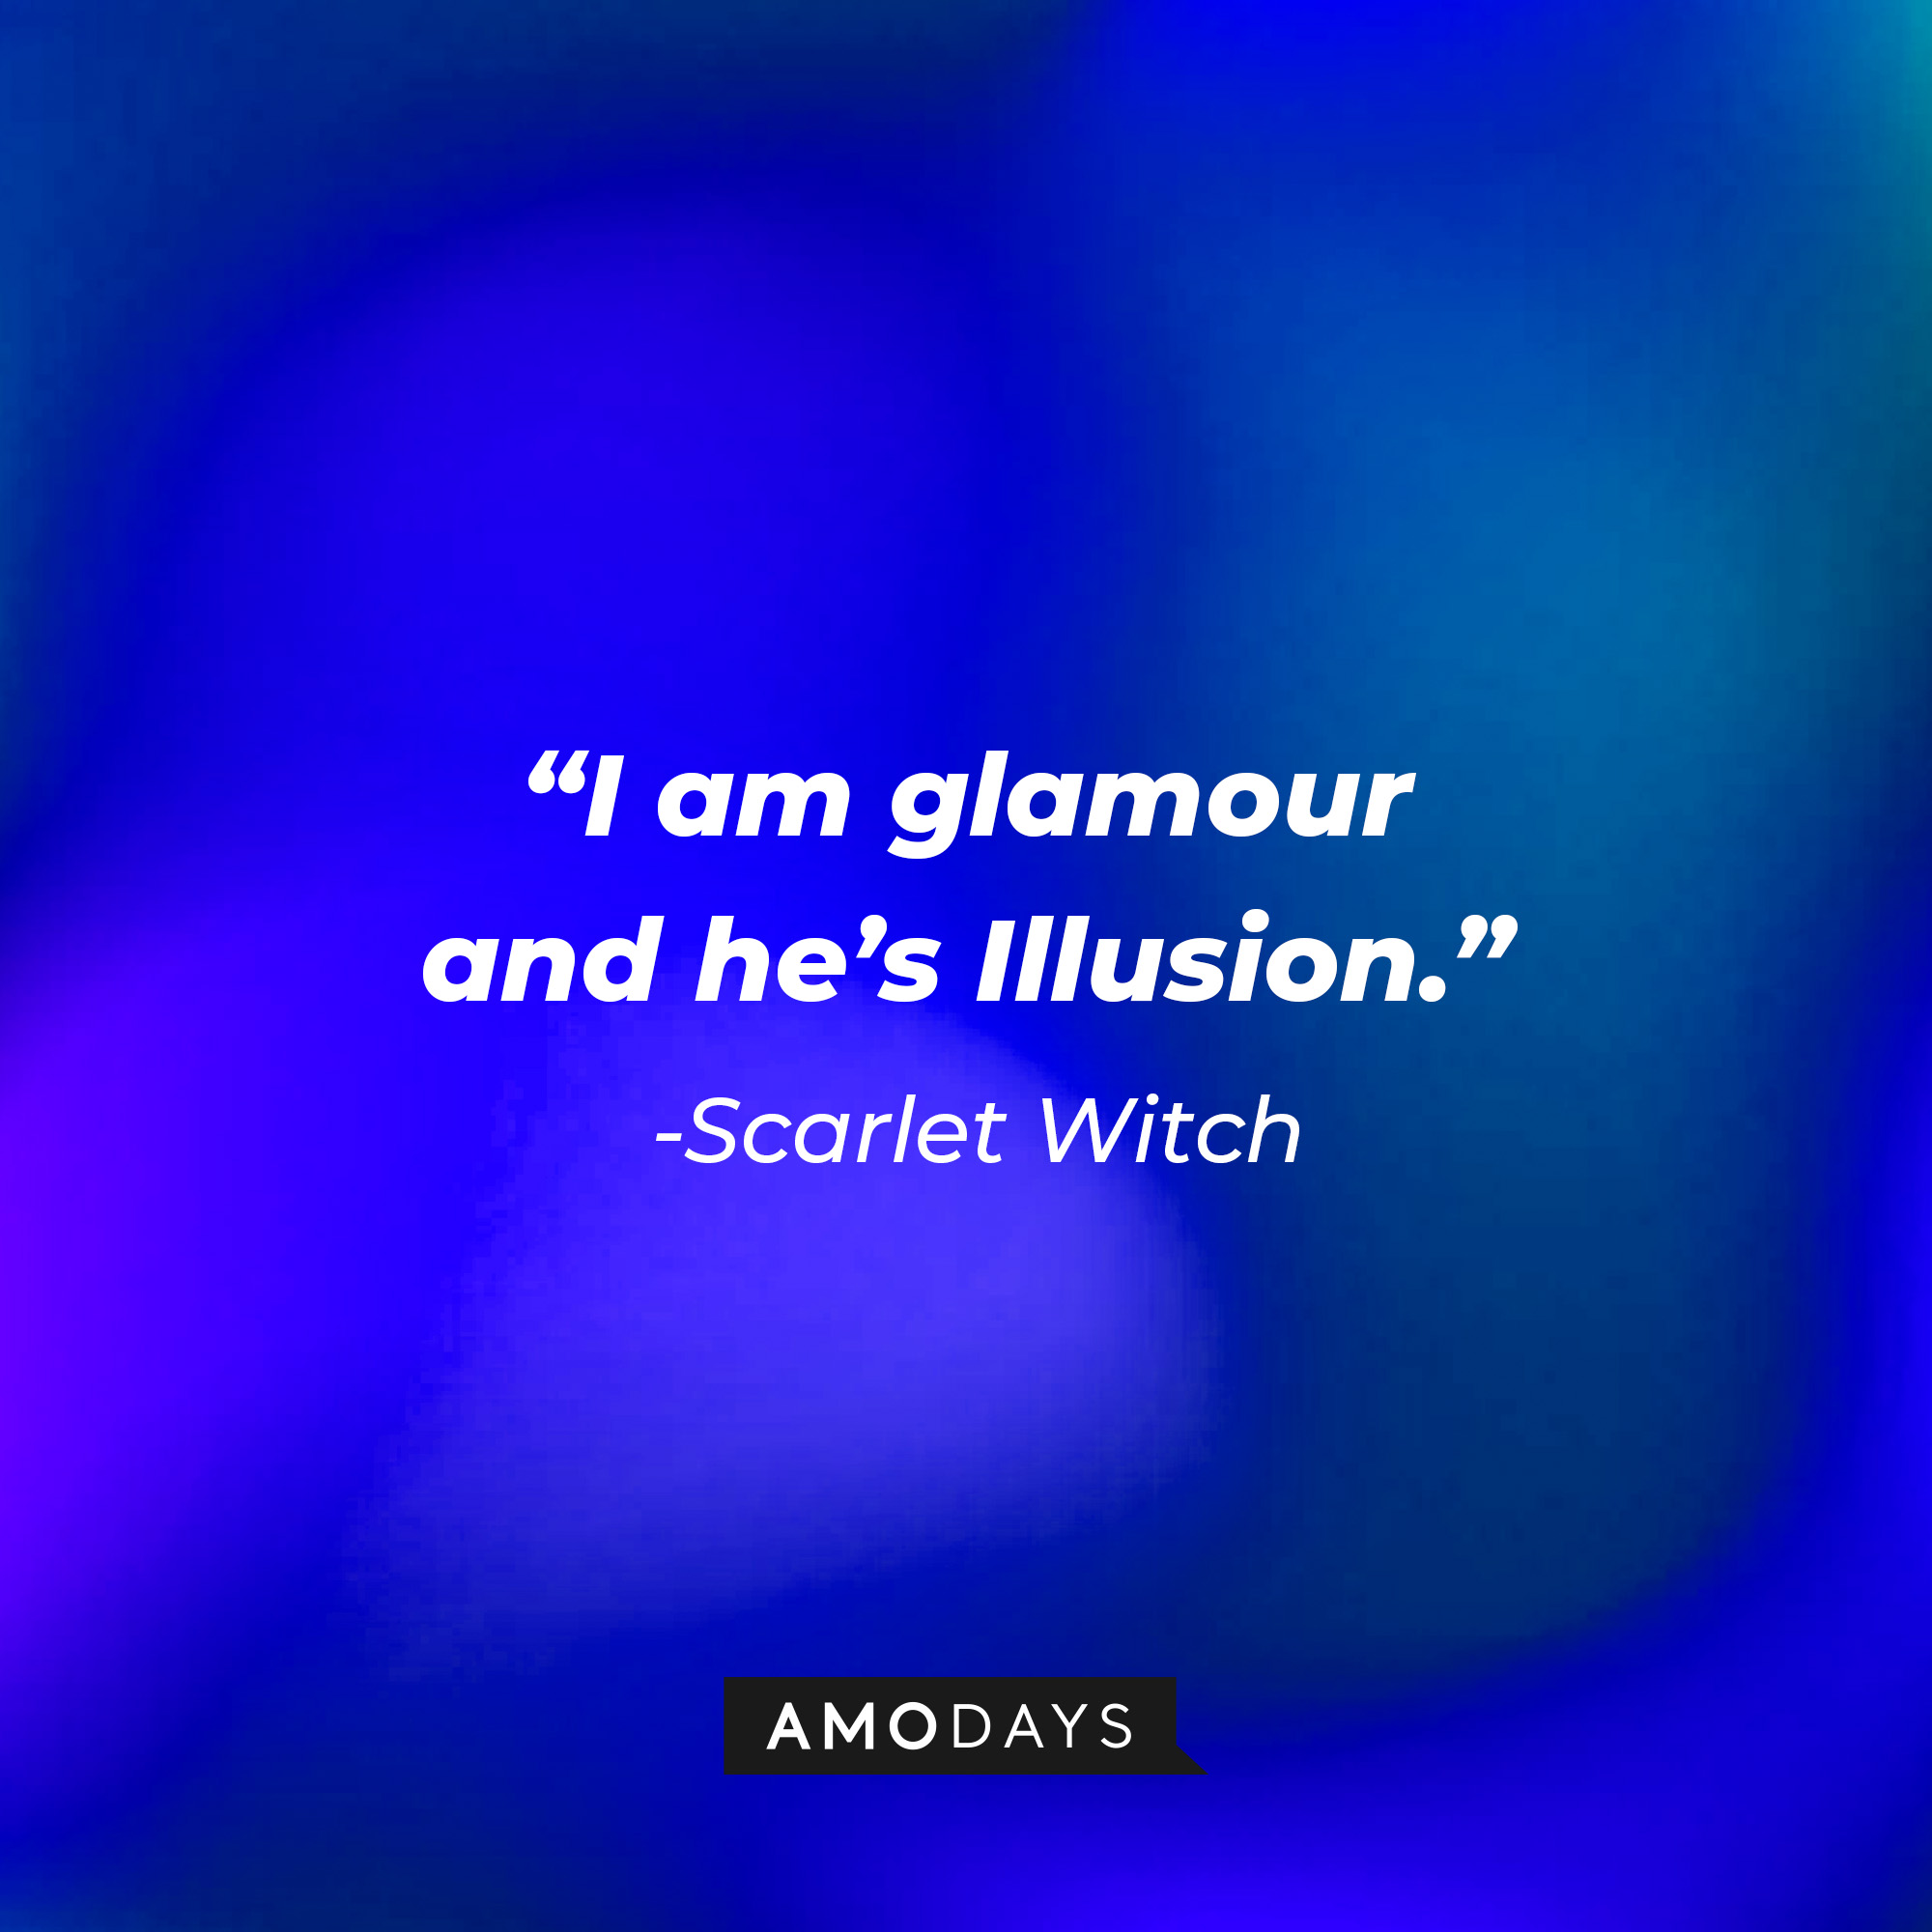 Scarlet Witch’s quote: “I am glamour, and he’s Illusion.” | Source: AmoDays